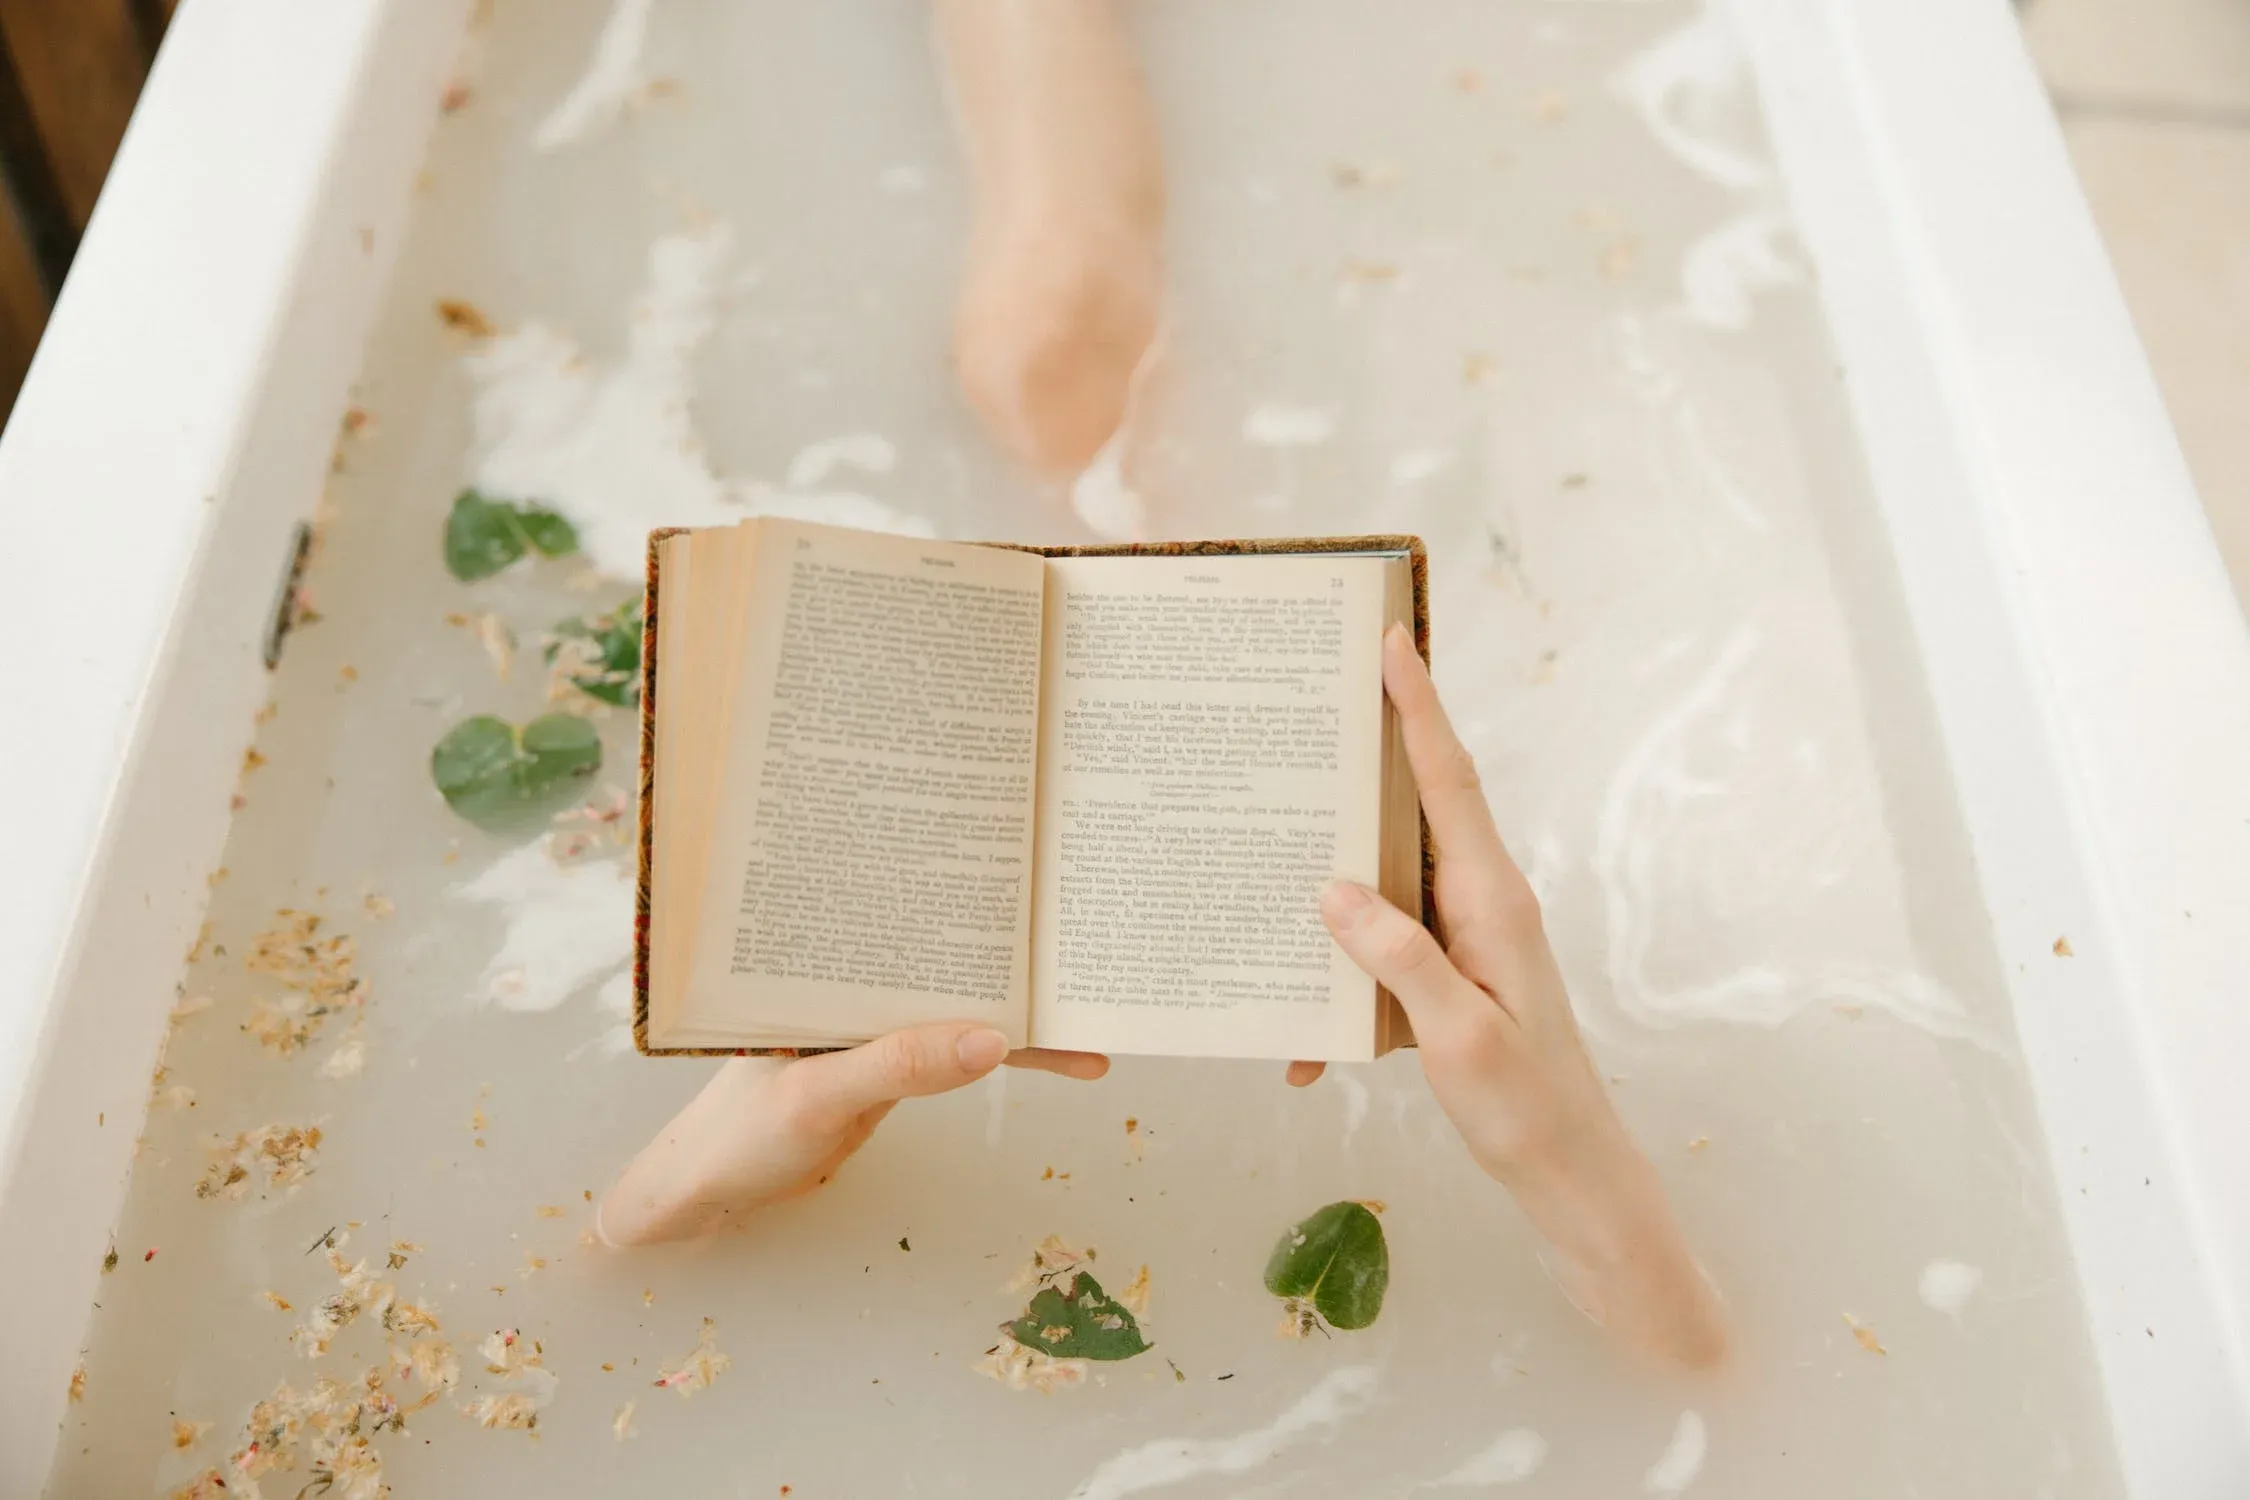 Accessories For Reading While Bathing